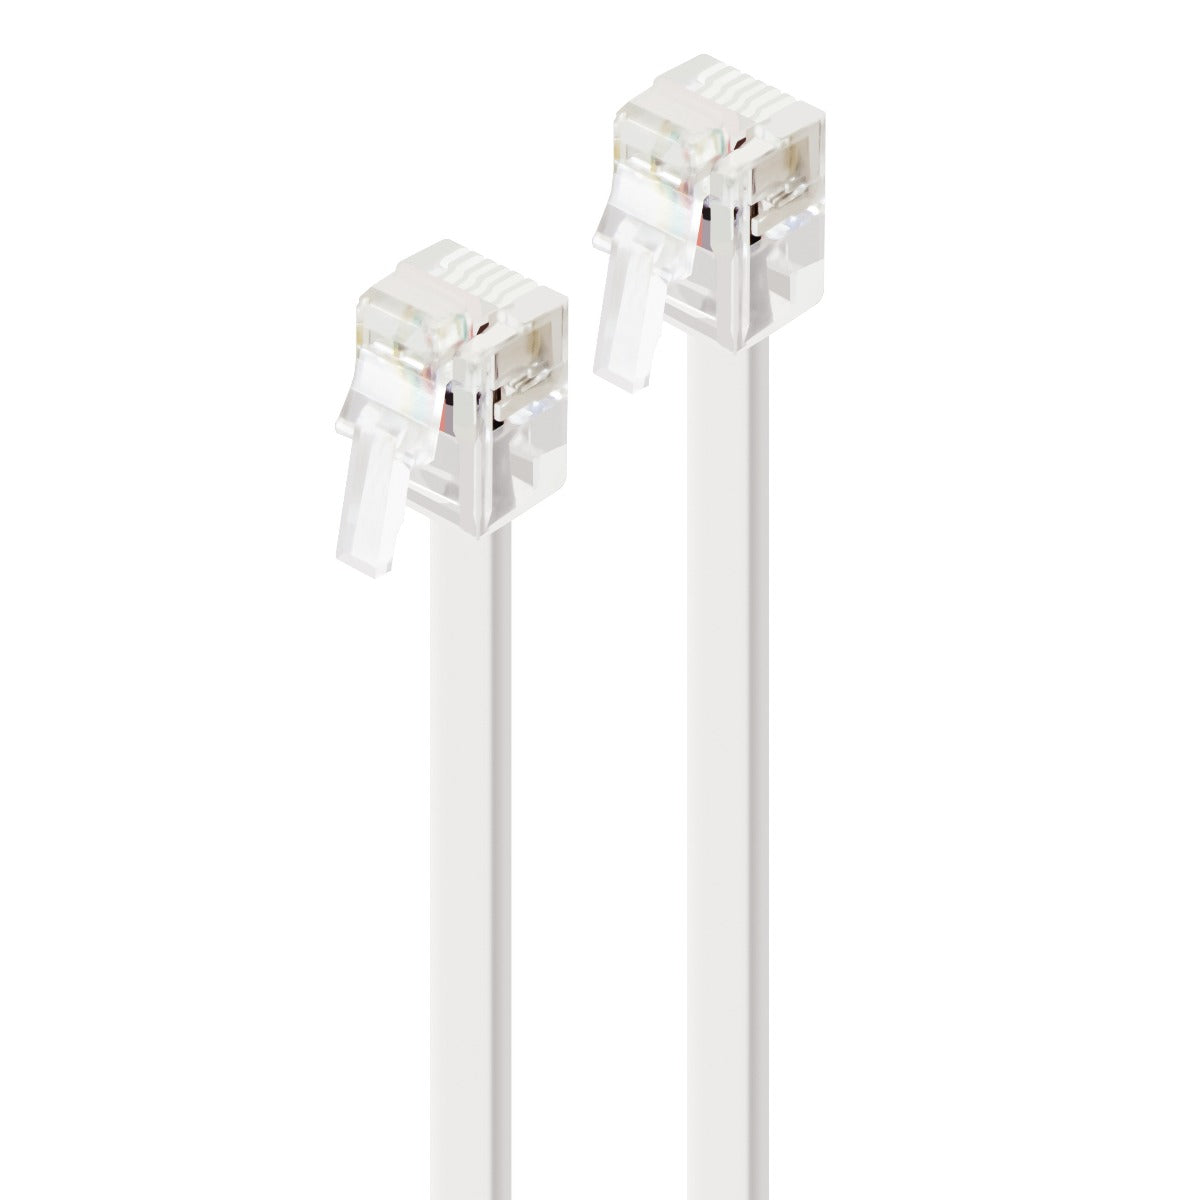 rj12-telephone-line-cable-2m_1